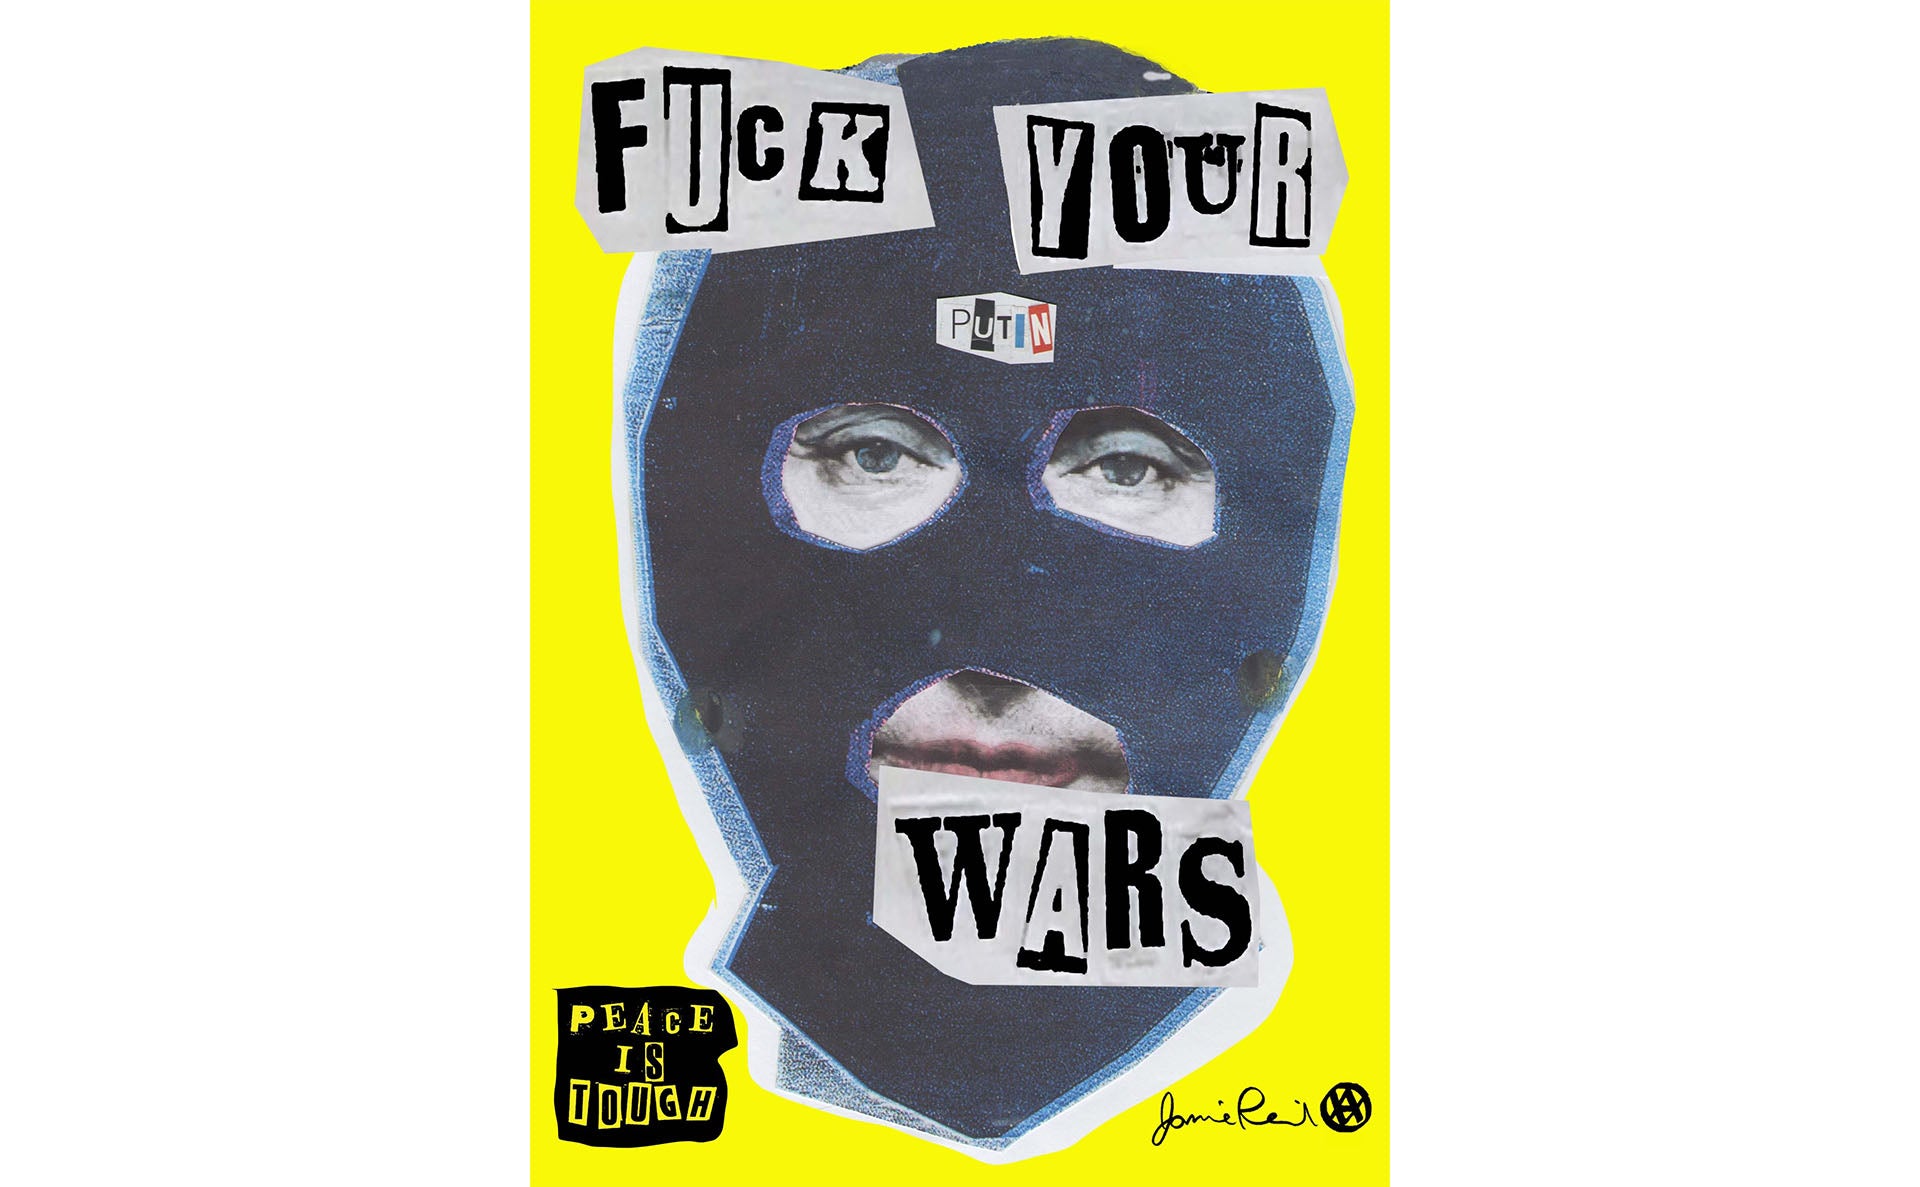 Fuck Your Wars